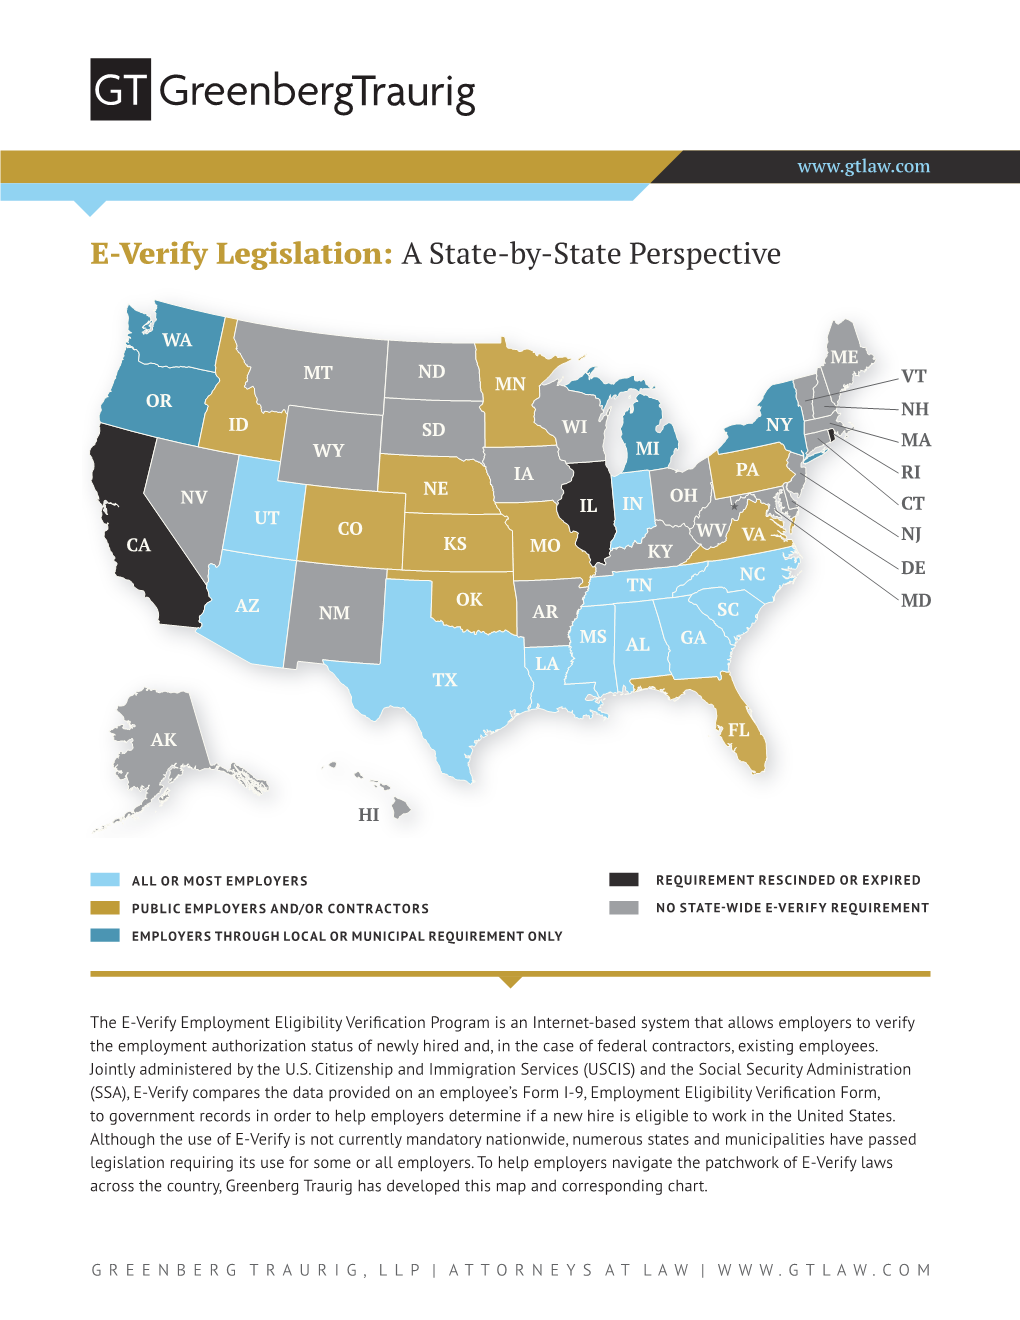 E-Verify Legislation: a State-By-State Perspective